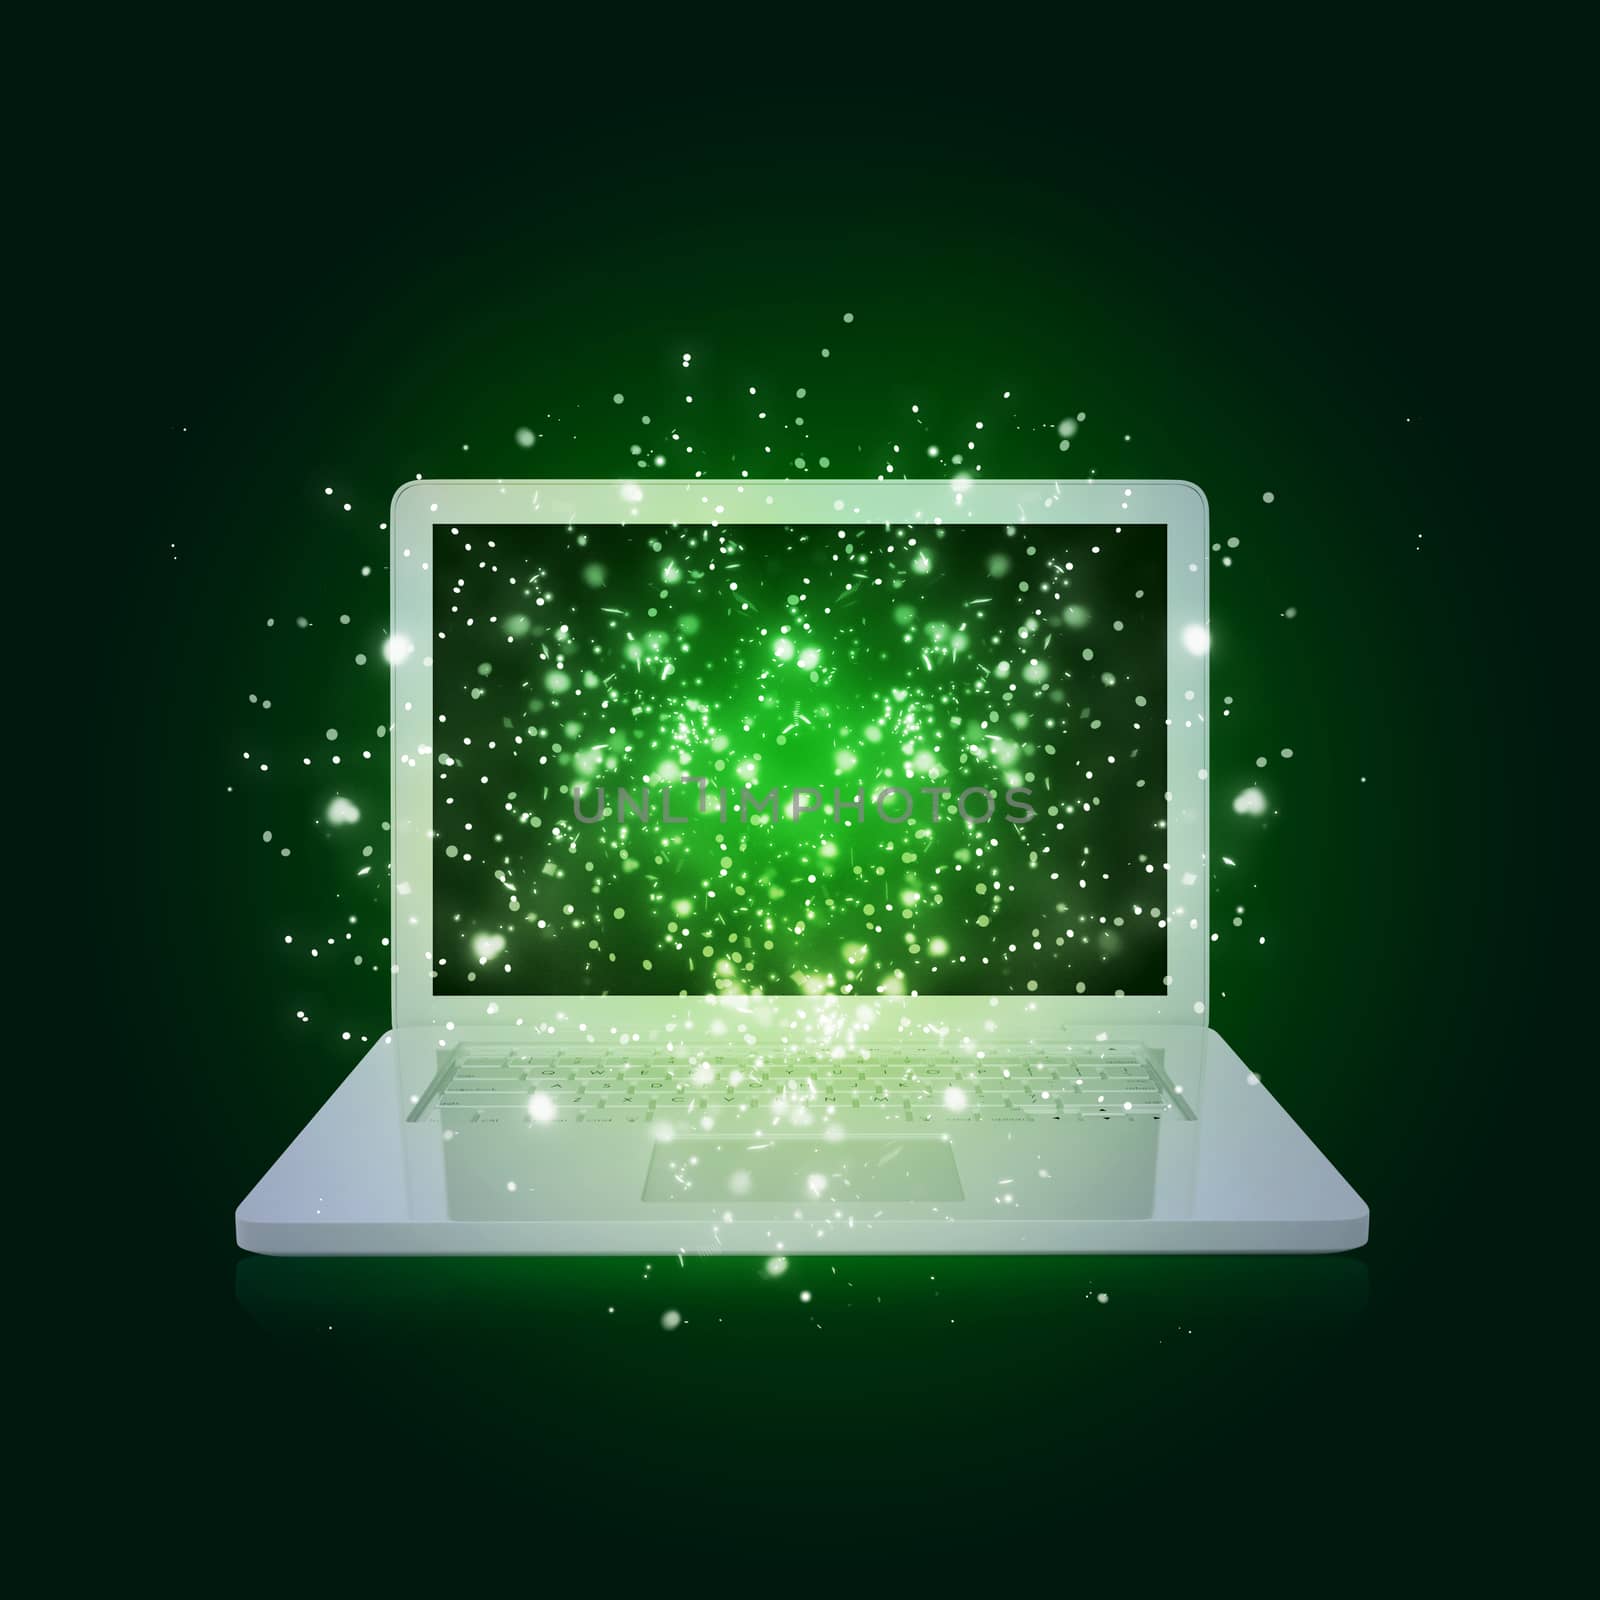 Open laptop with magic light and falling stars by cherezoff